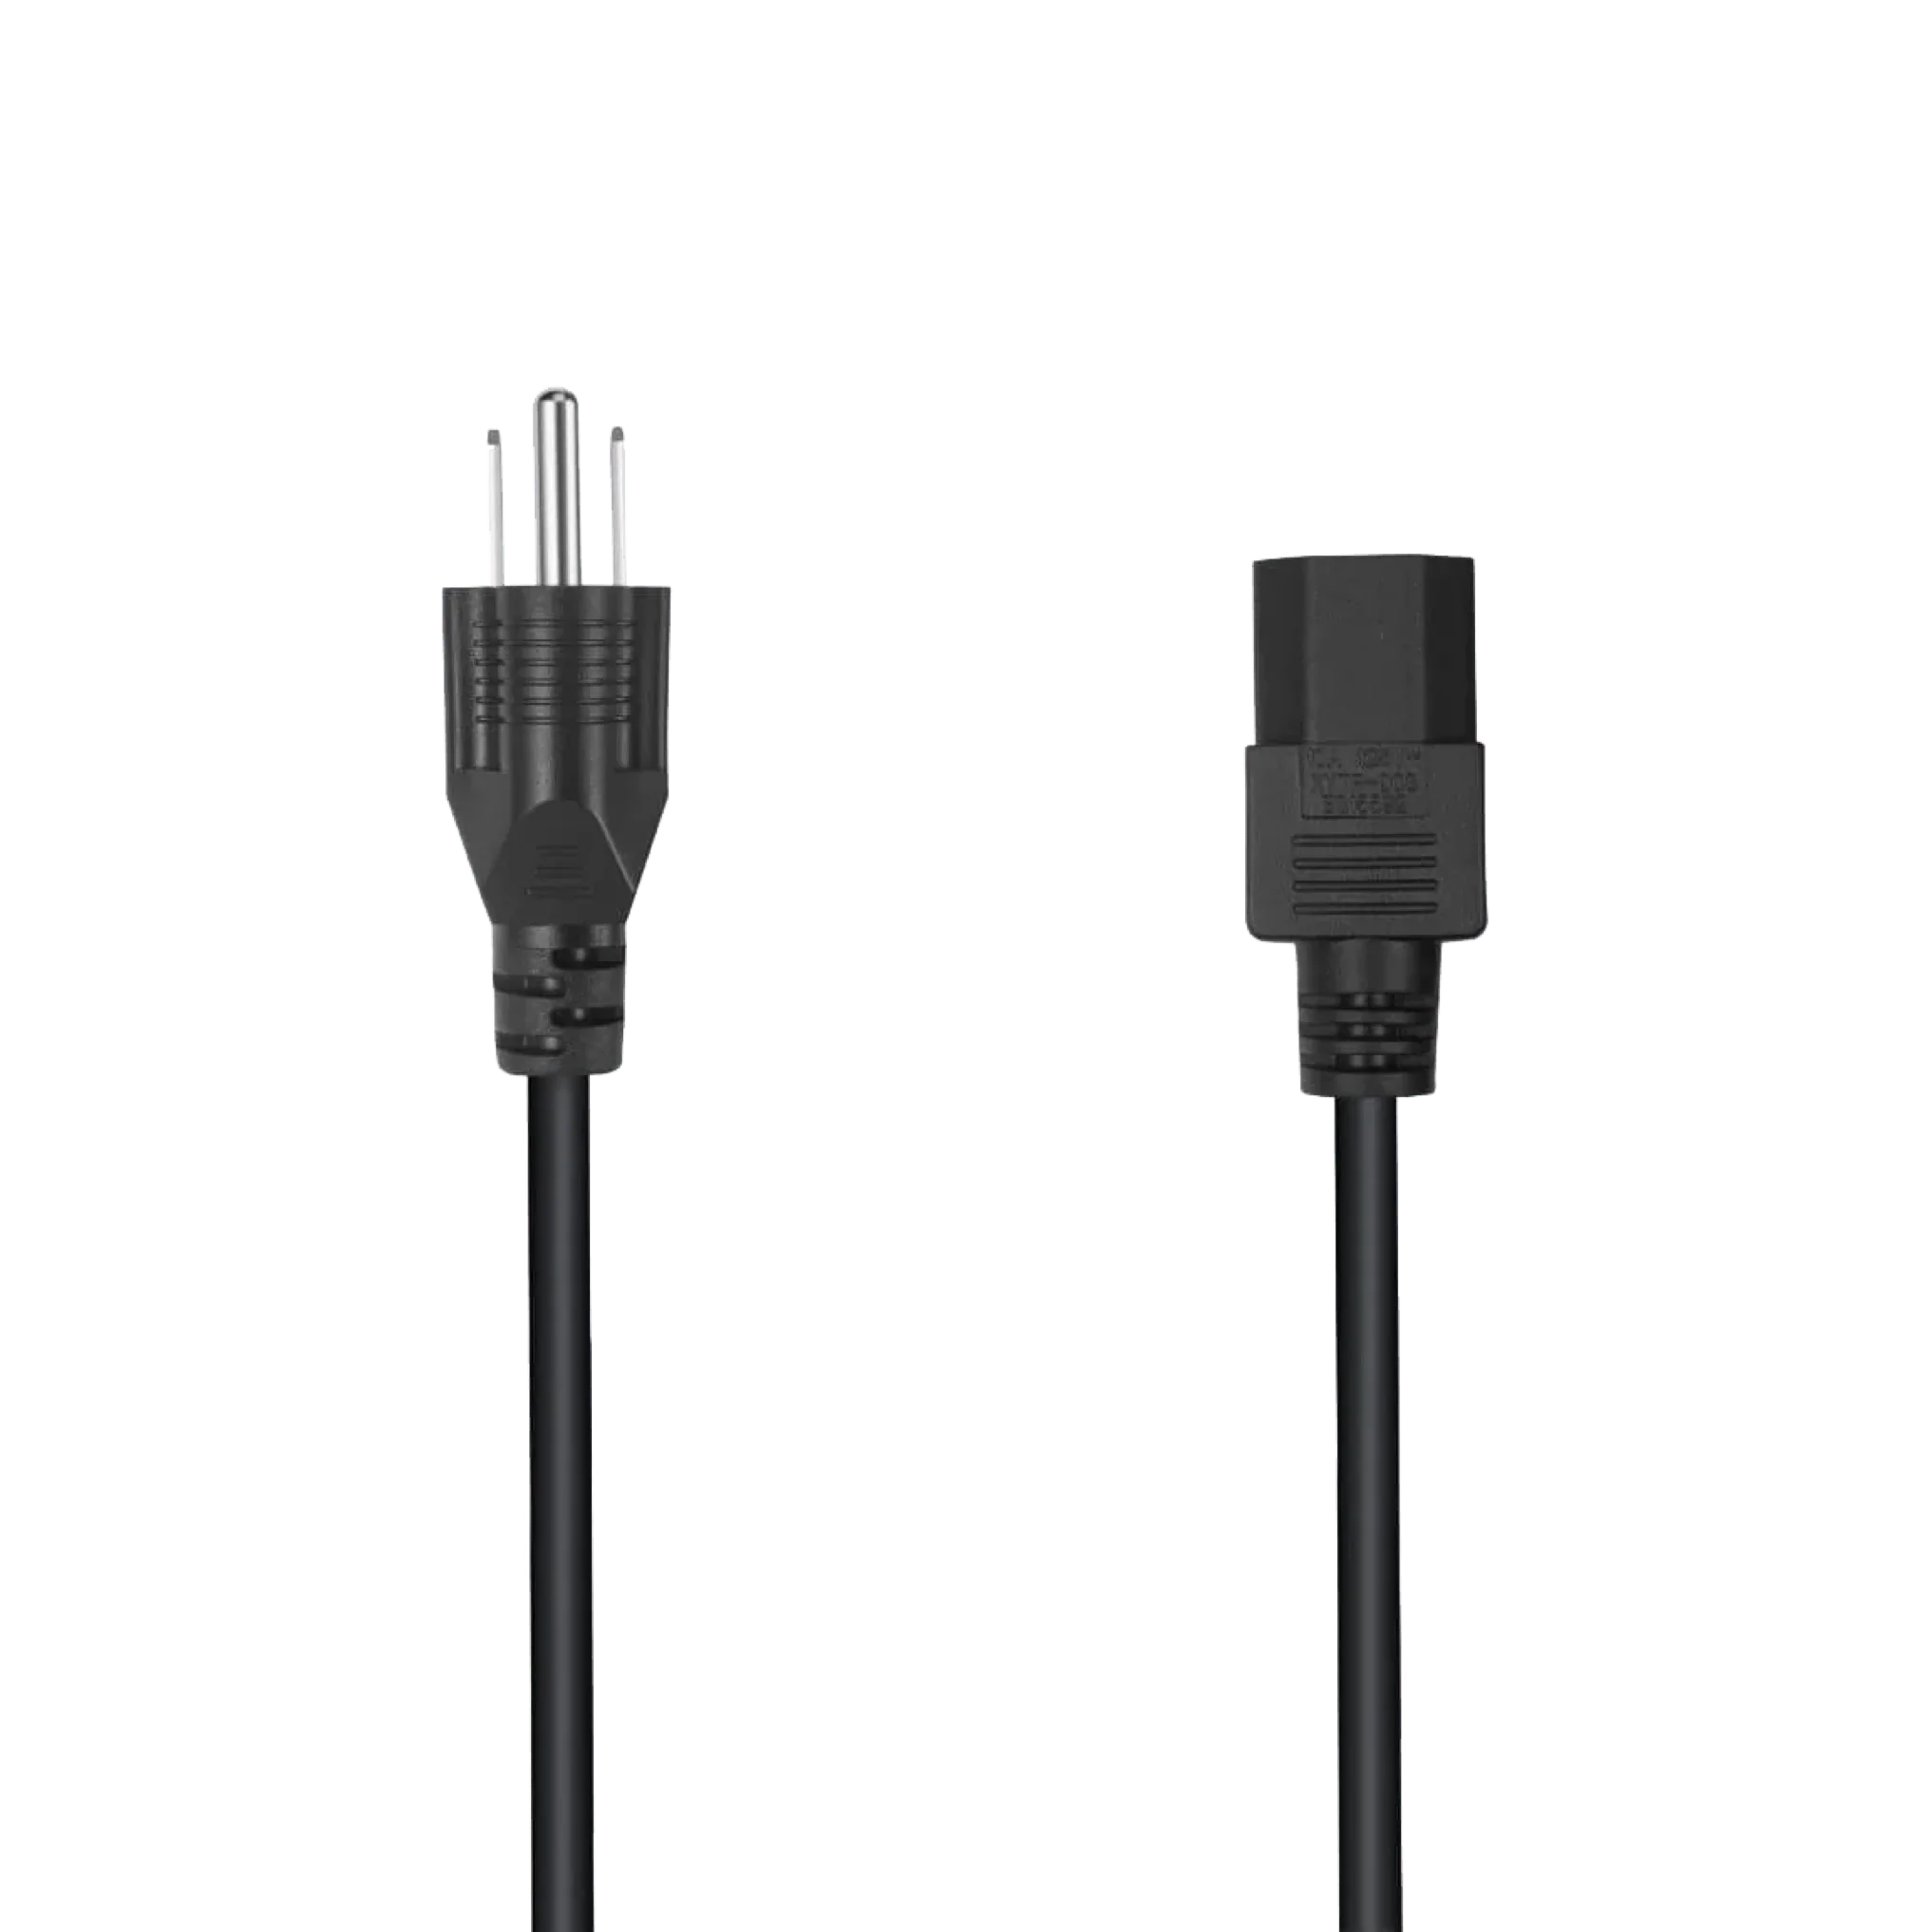 An EcoFlow AC Charging Cable with two plugs.